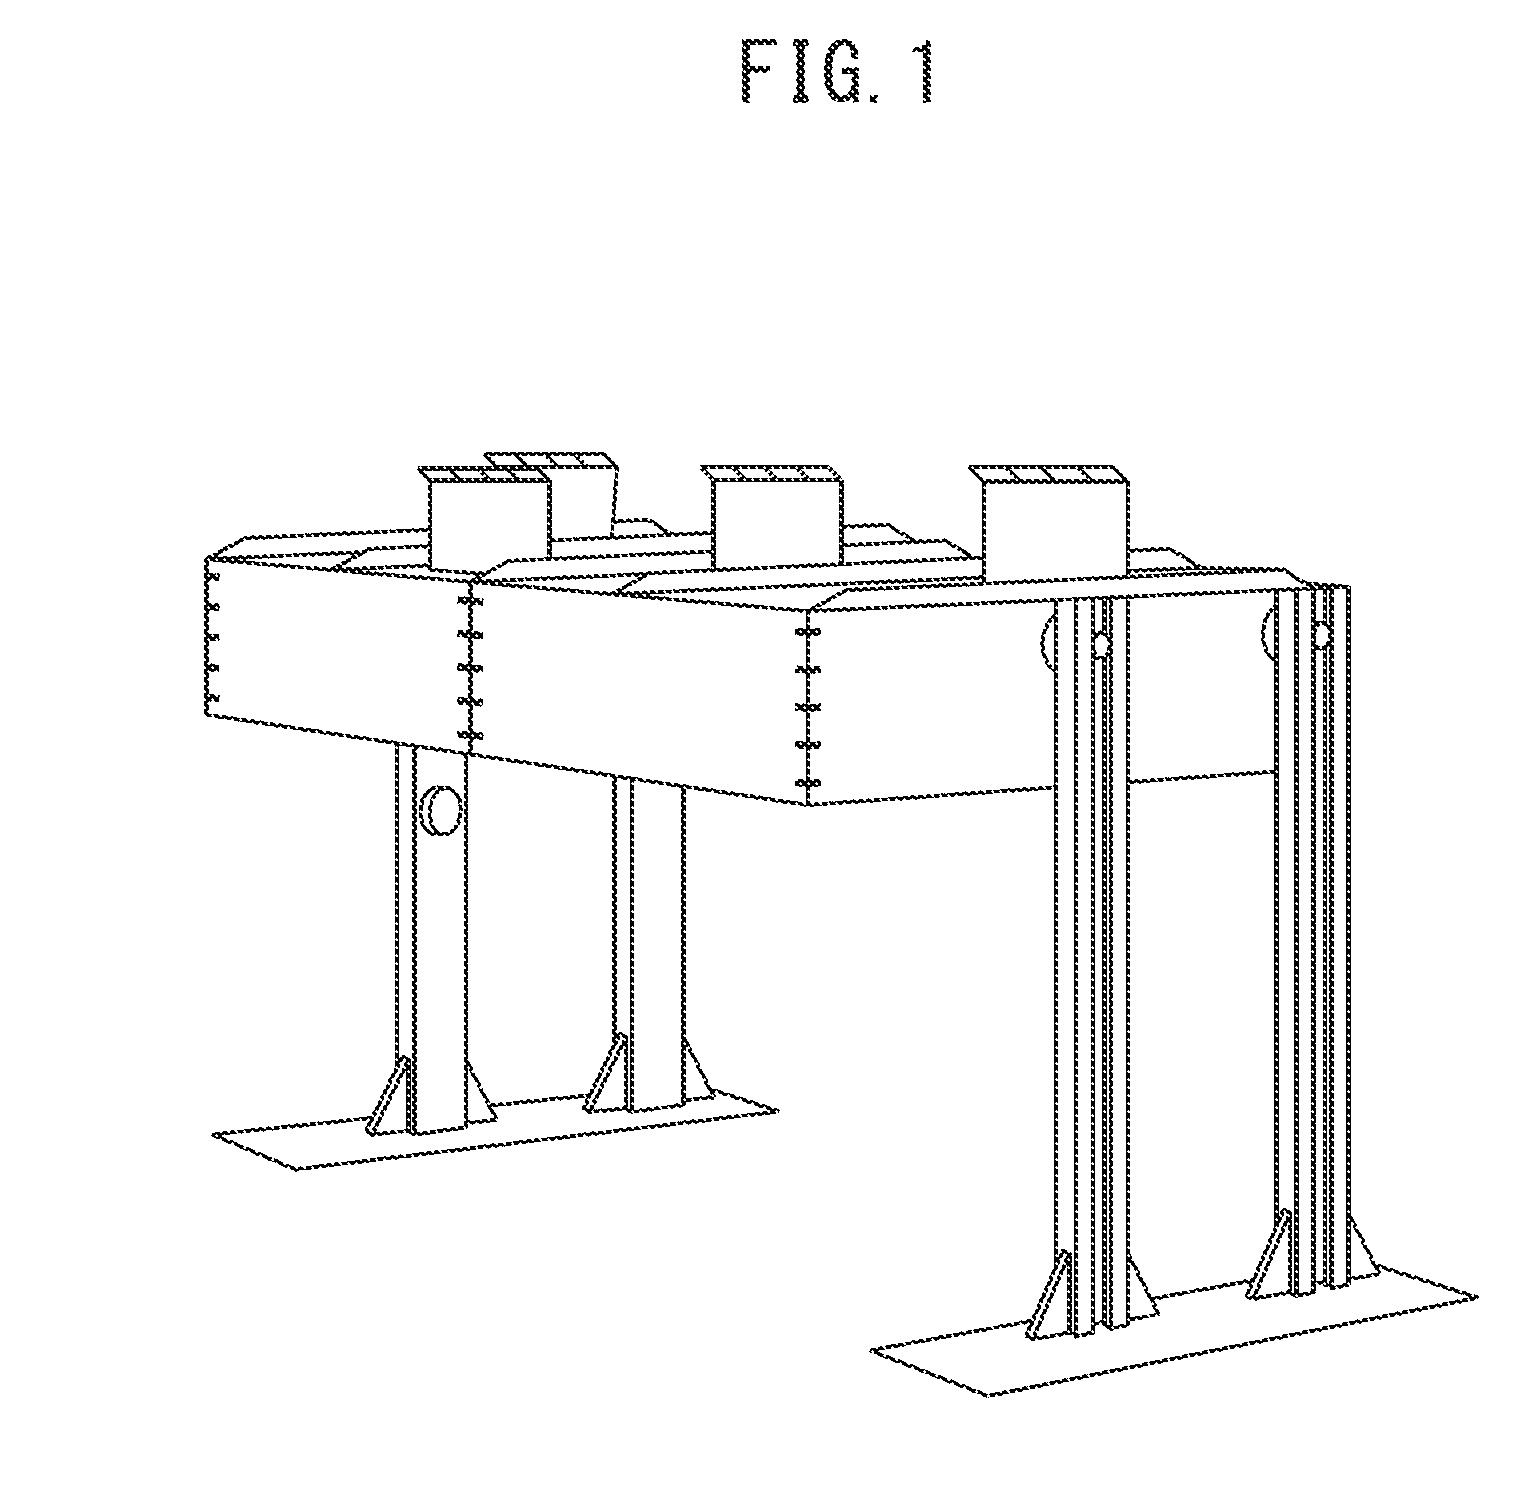 Surface treatment composition for coated steel sheet, surface treated plated steel sheet and method of production of same, and coated plated steel sheet and method of production of same